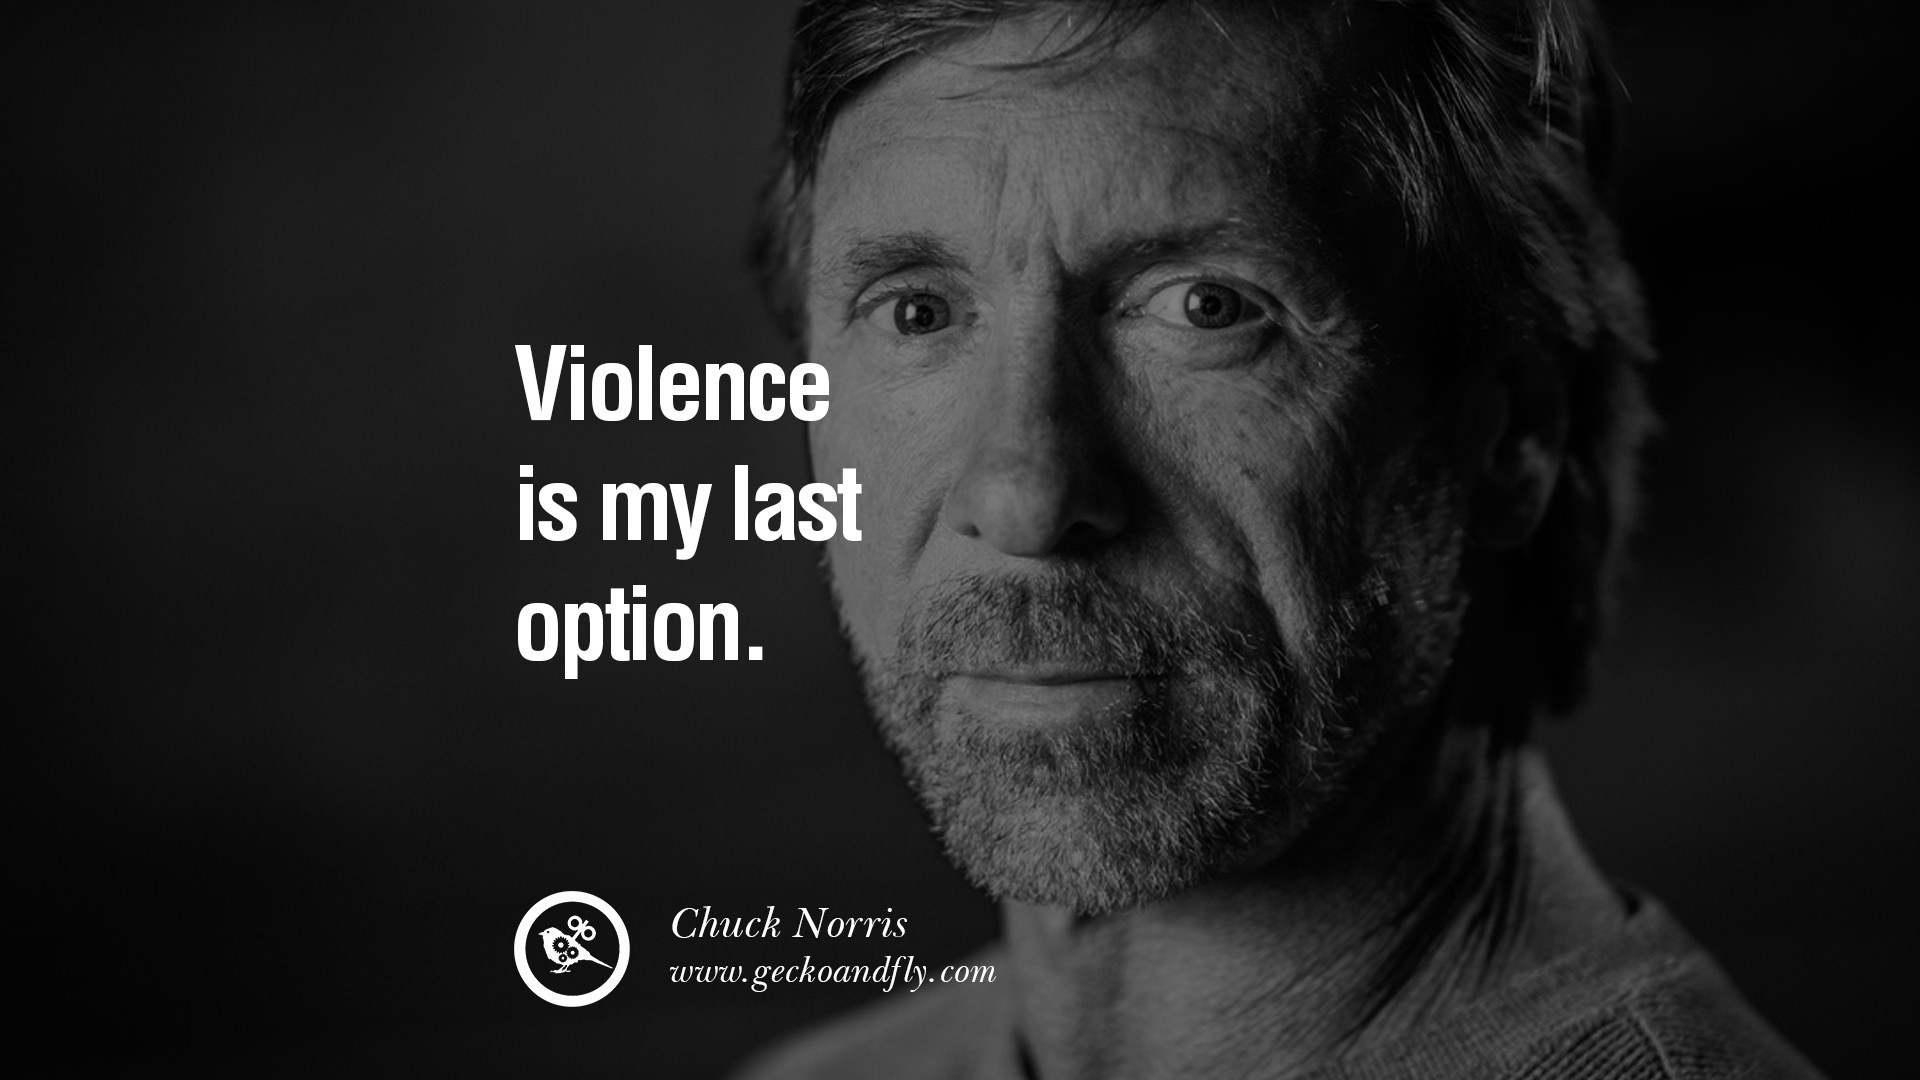 1920x1080 10 Famous Chuck Norris Quotes, Facts and Jokes